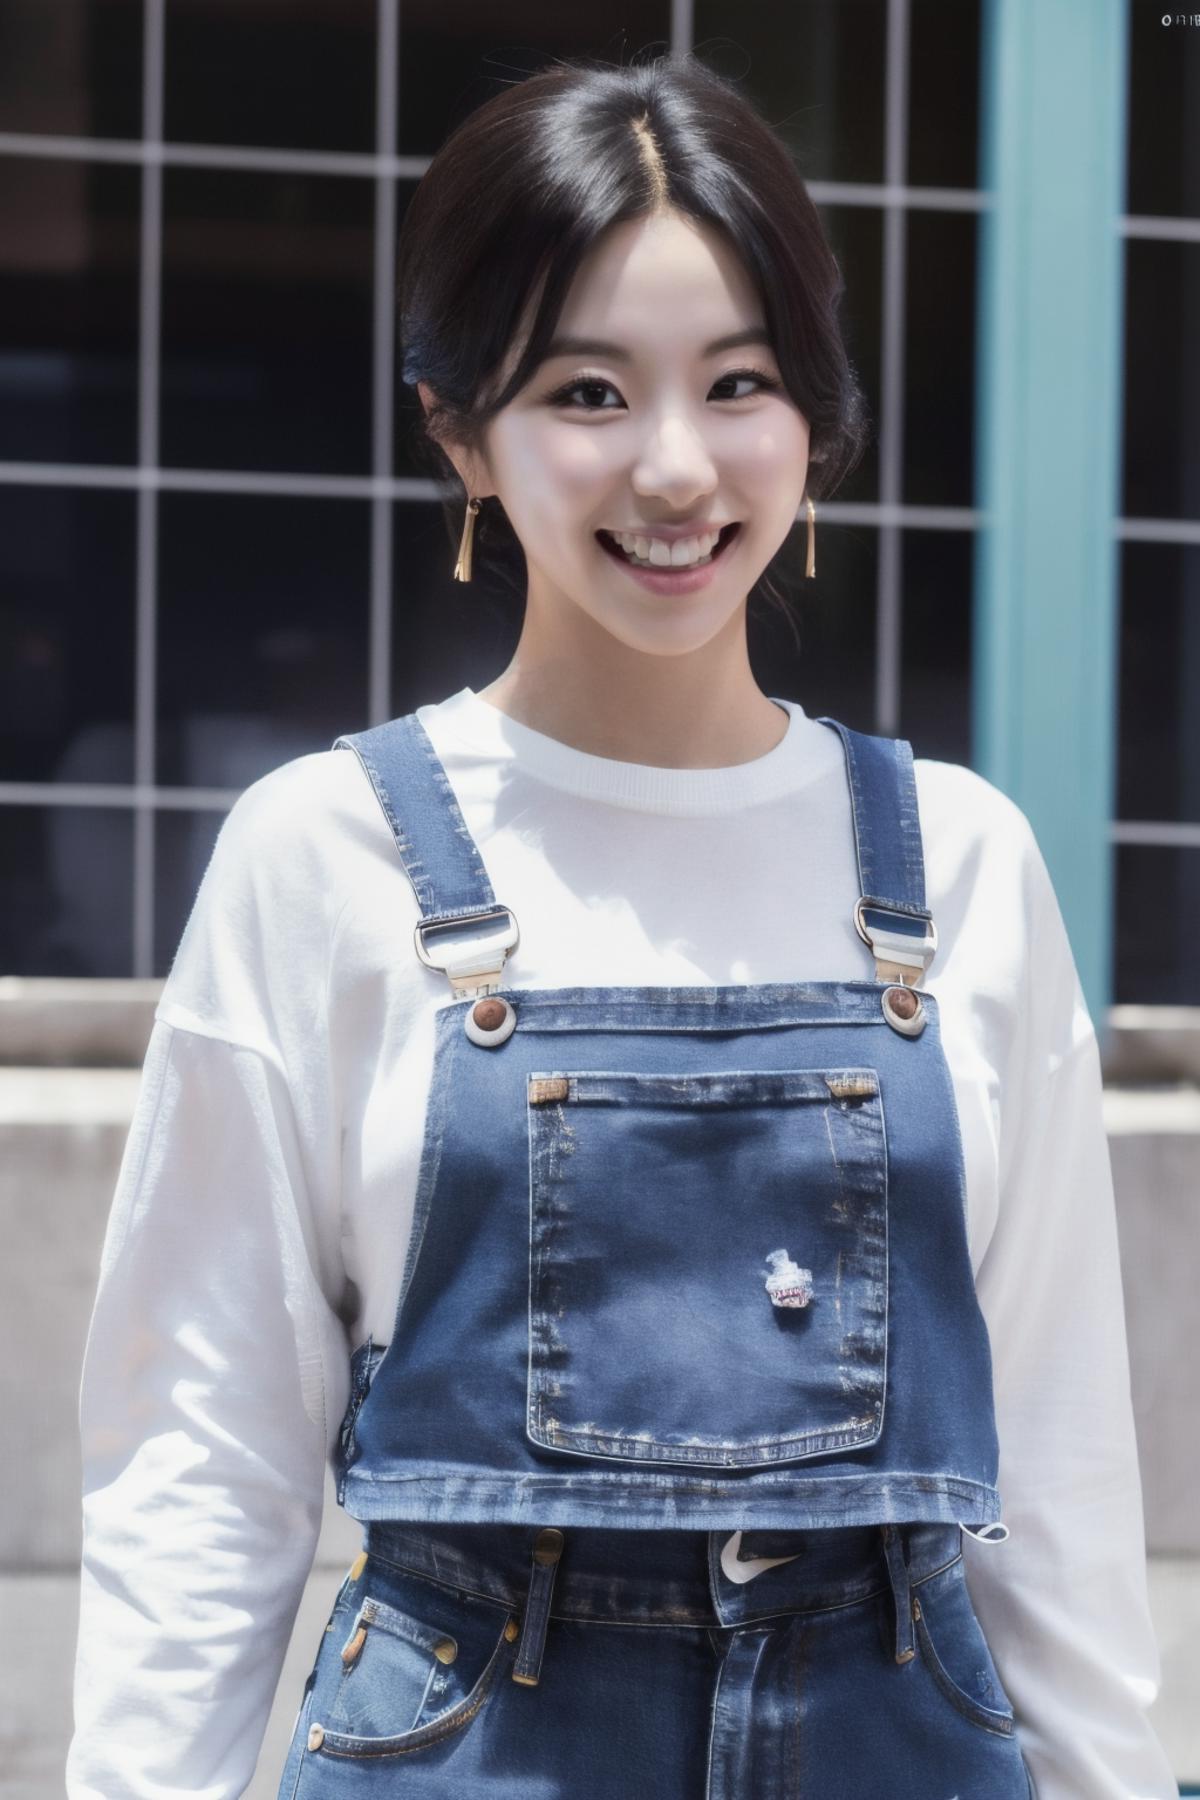 Twice Chaeyoung Son image by nukerofface